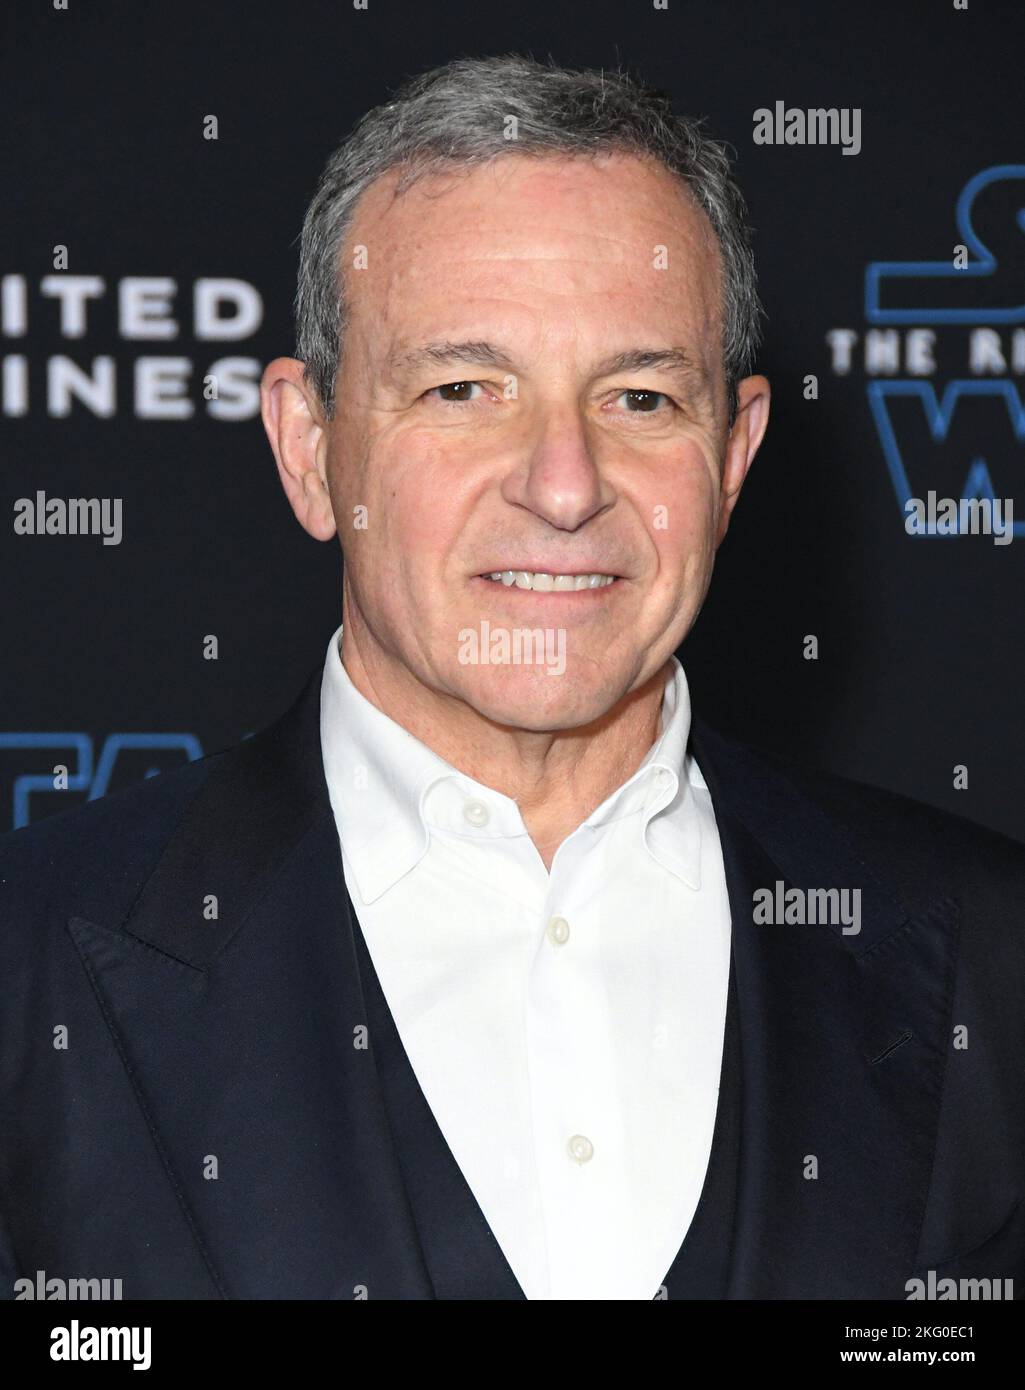 16 December 2019 - Hollywood, California - Bob Iger. Disney's 'Star Wars: The Rise Of Skywalker' Los Angeles Premiere held at Hollywood. Photo Credit: Birdie Thompson/AdMedia /MediaPunch Stock Photo